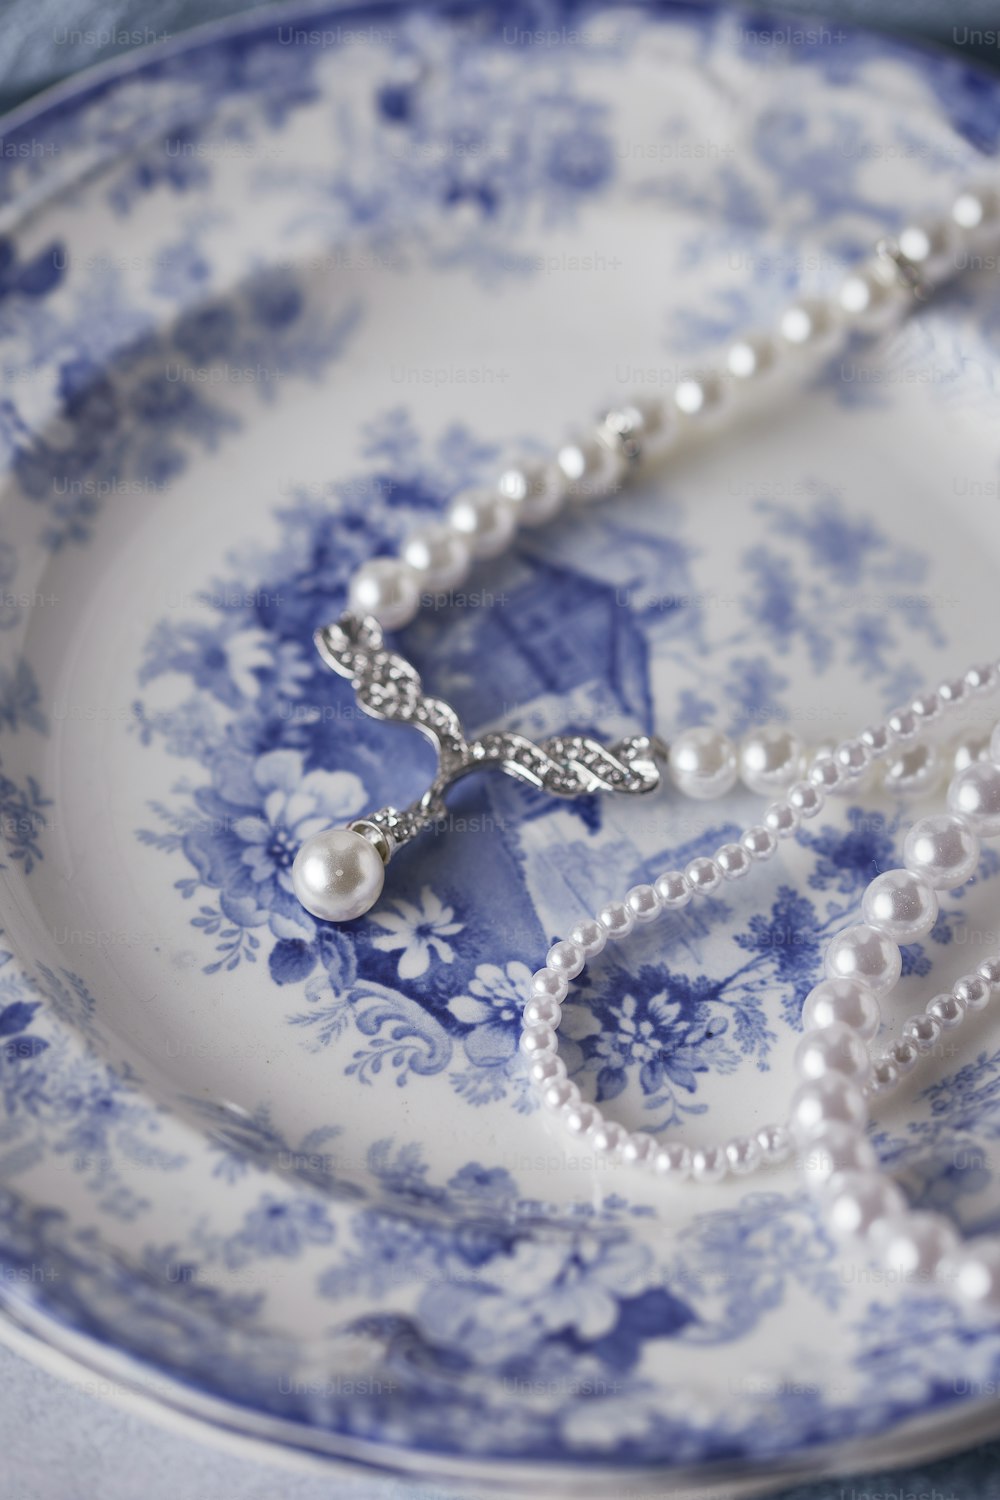 a blue and white plate with a necklace on it